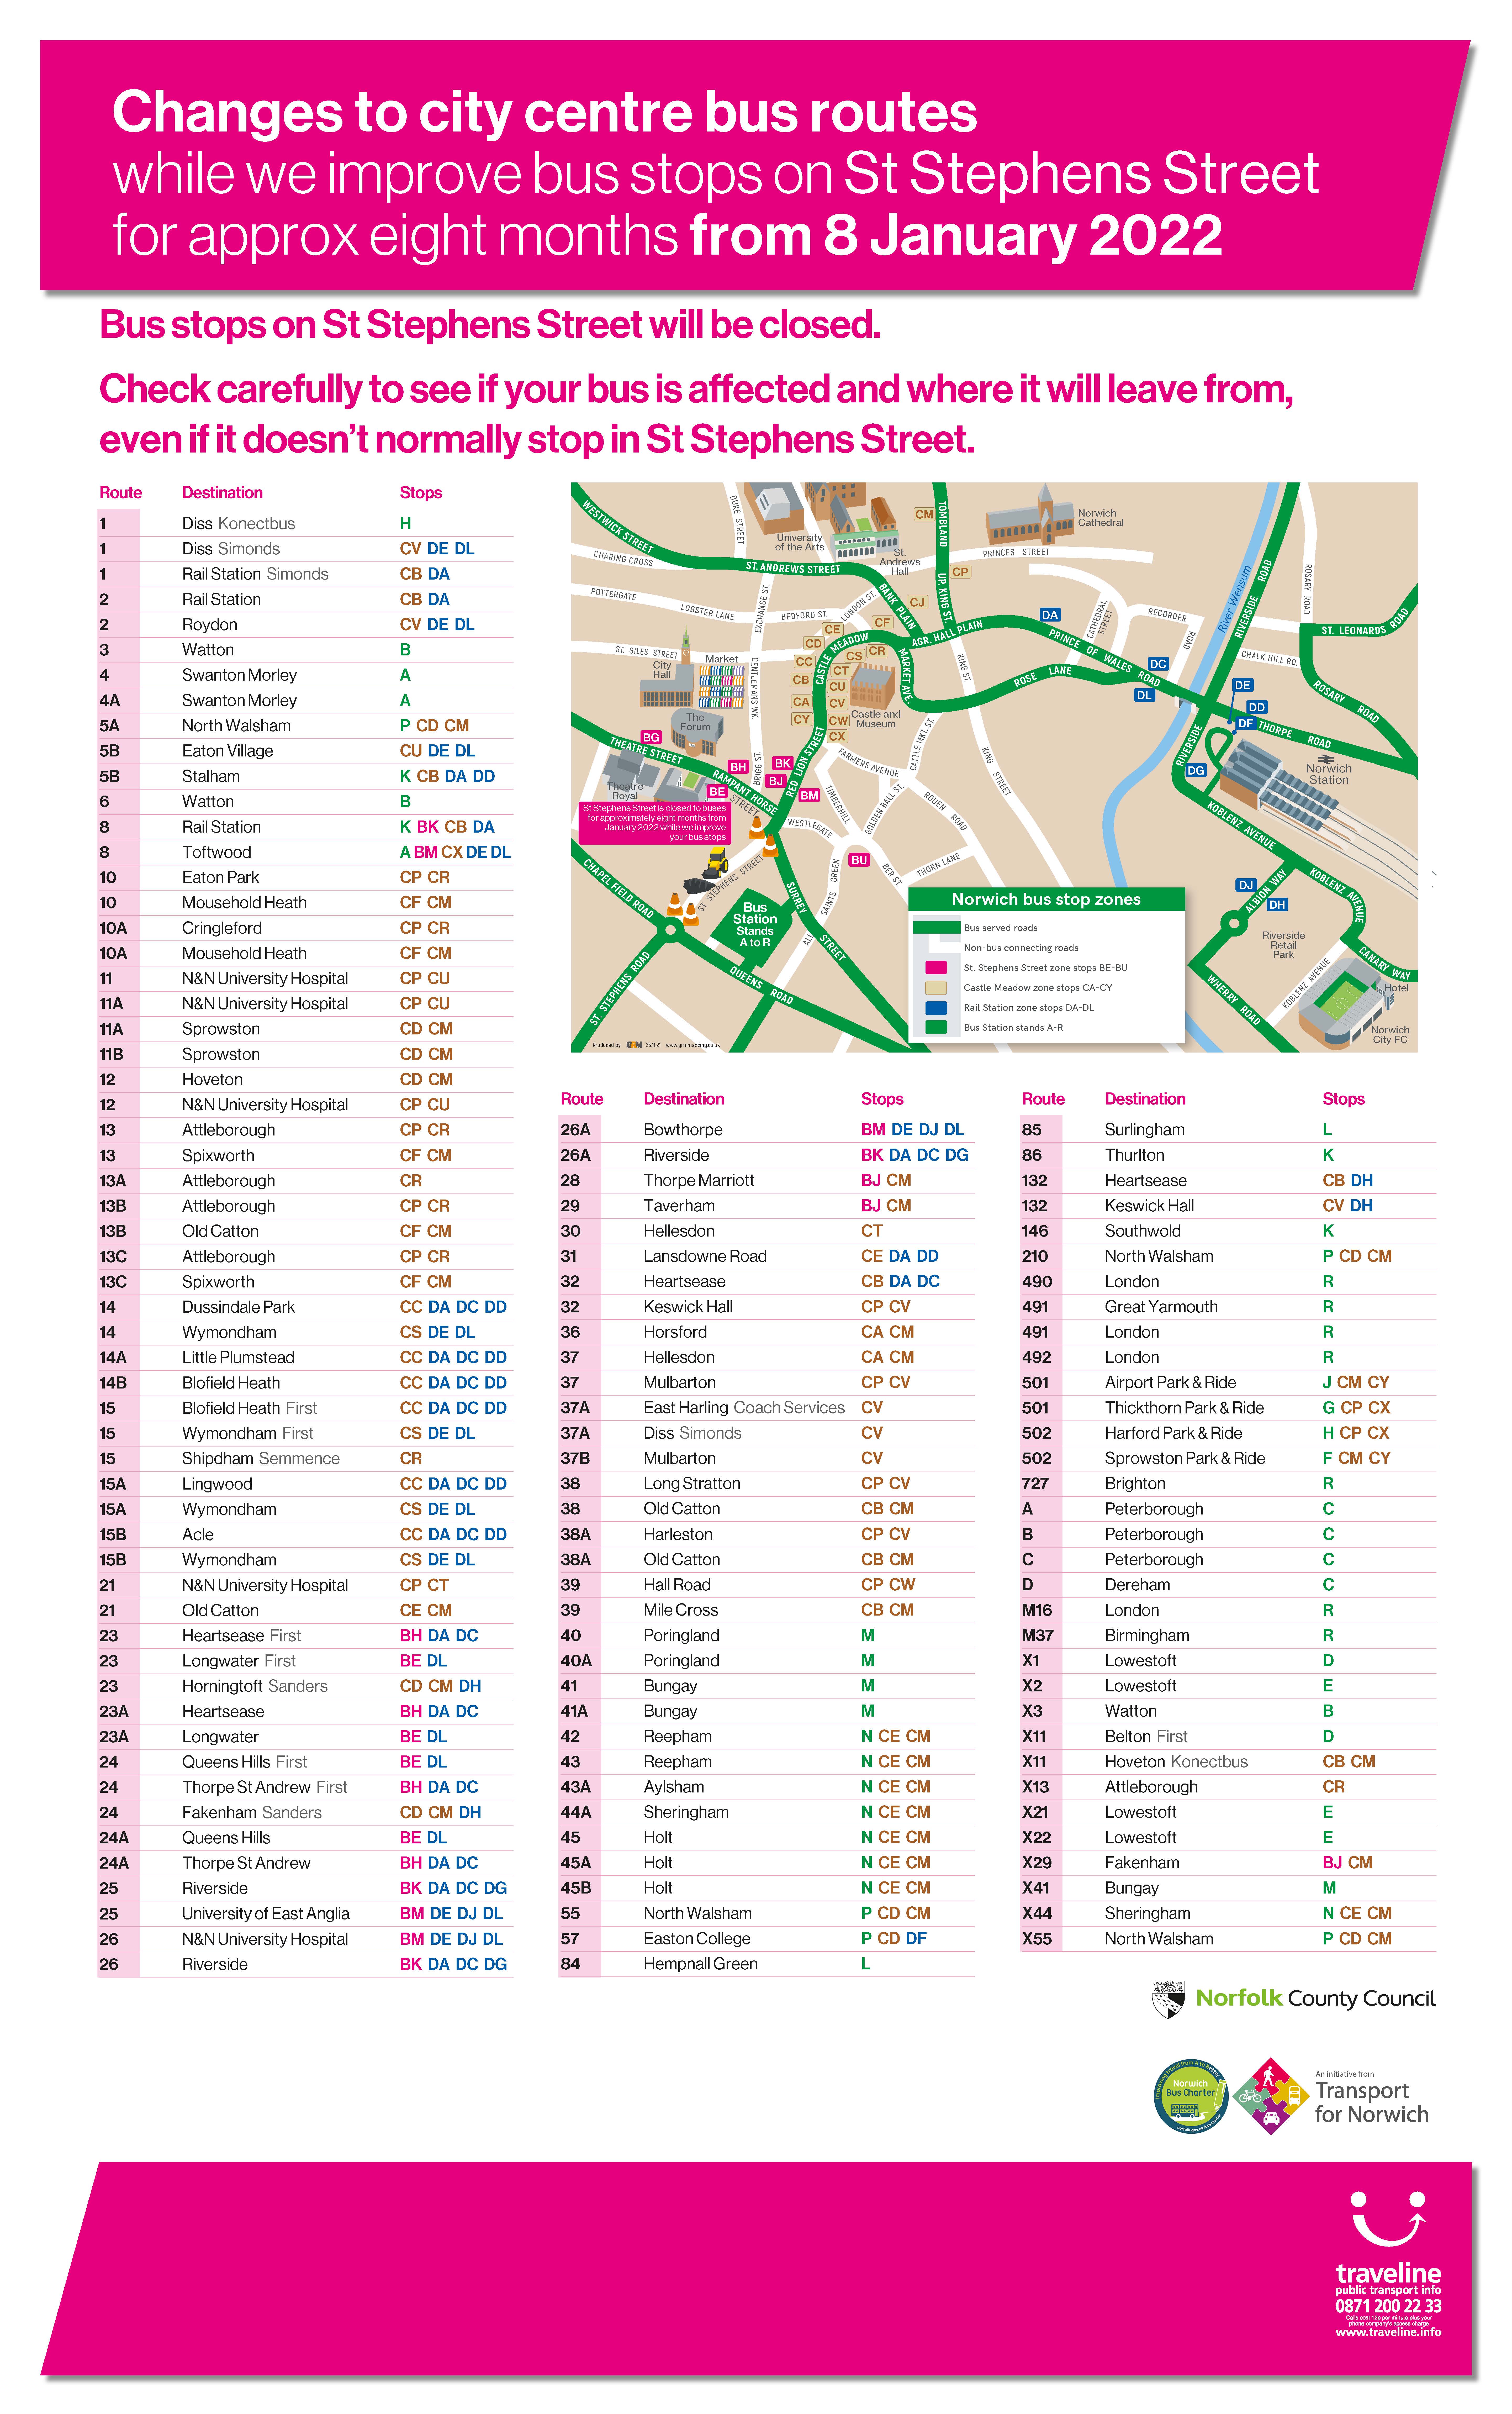 Image of planned bus stop closures in January 2022